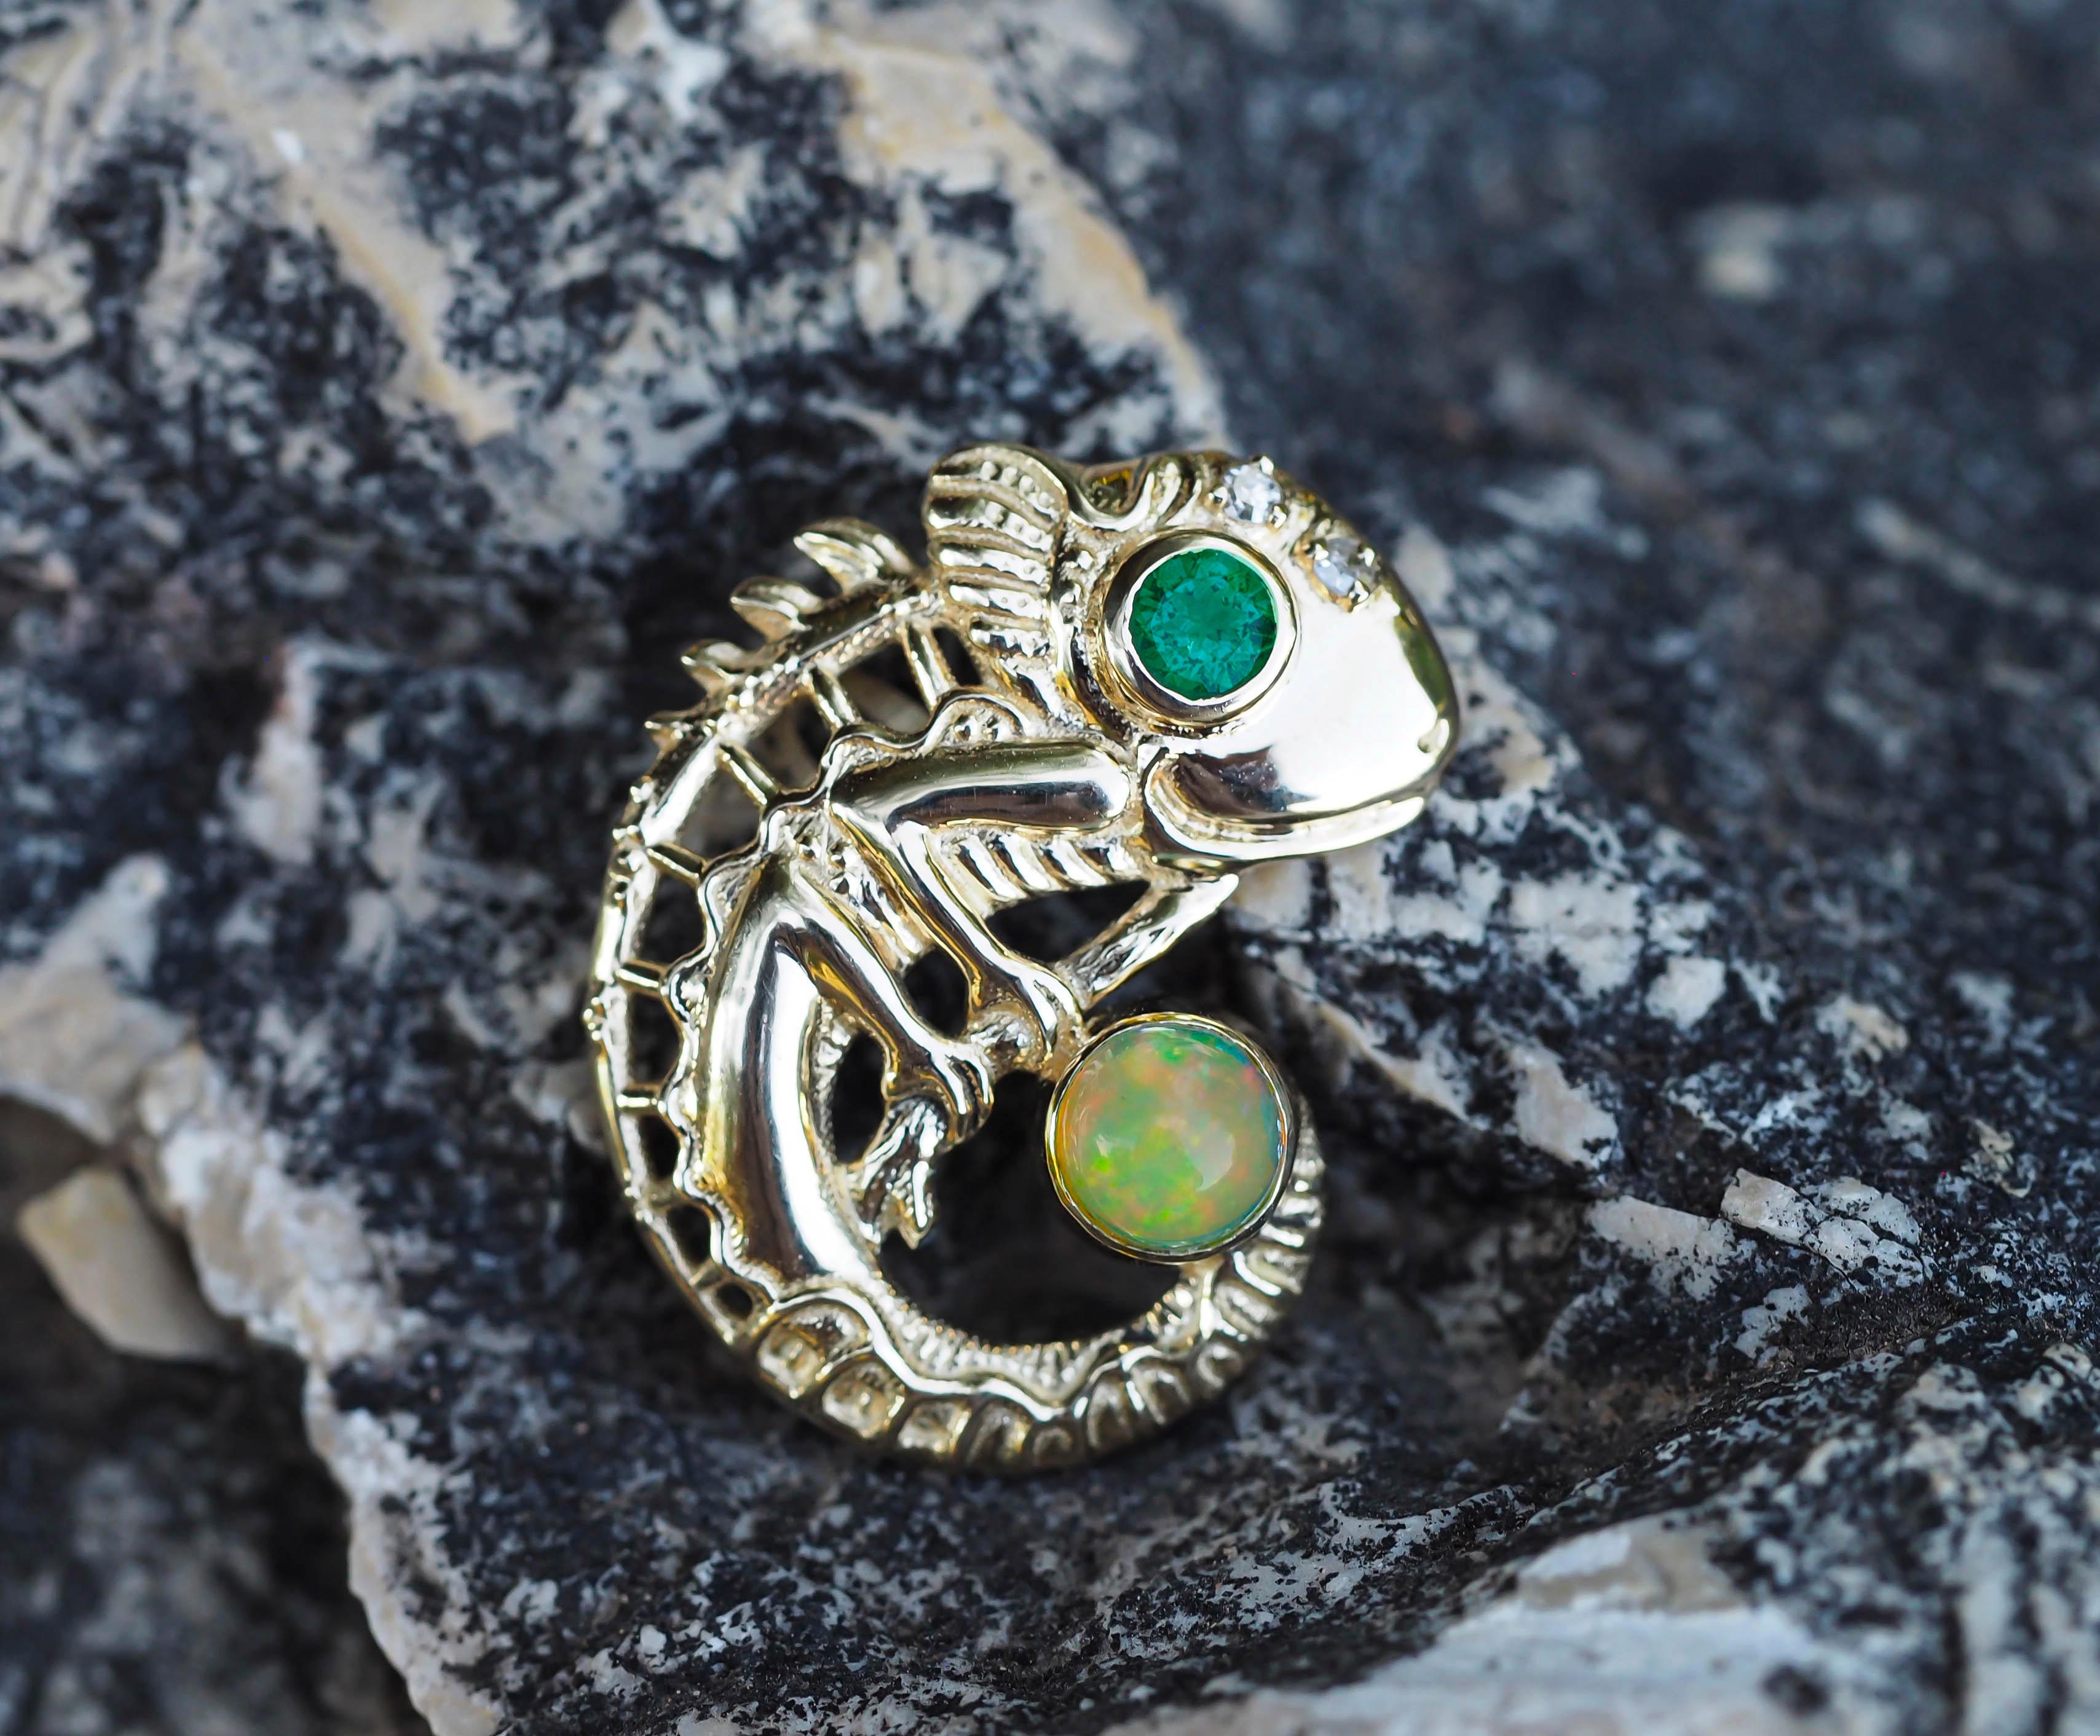 14k Gold Pendant with Opal, Emerald and Diamonds, Chameleon Pendant For Sale 2